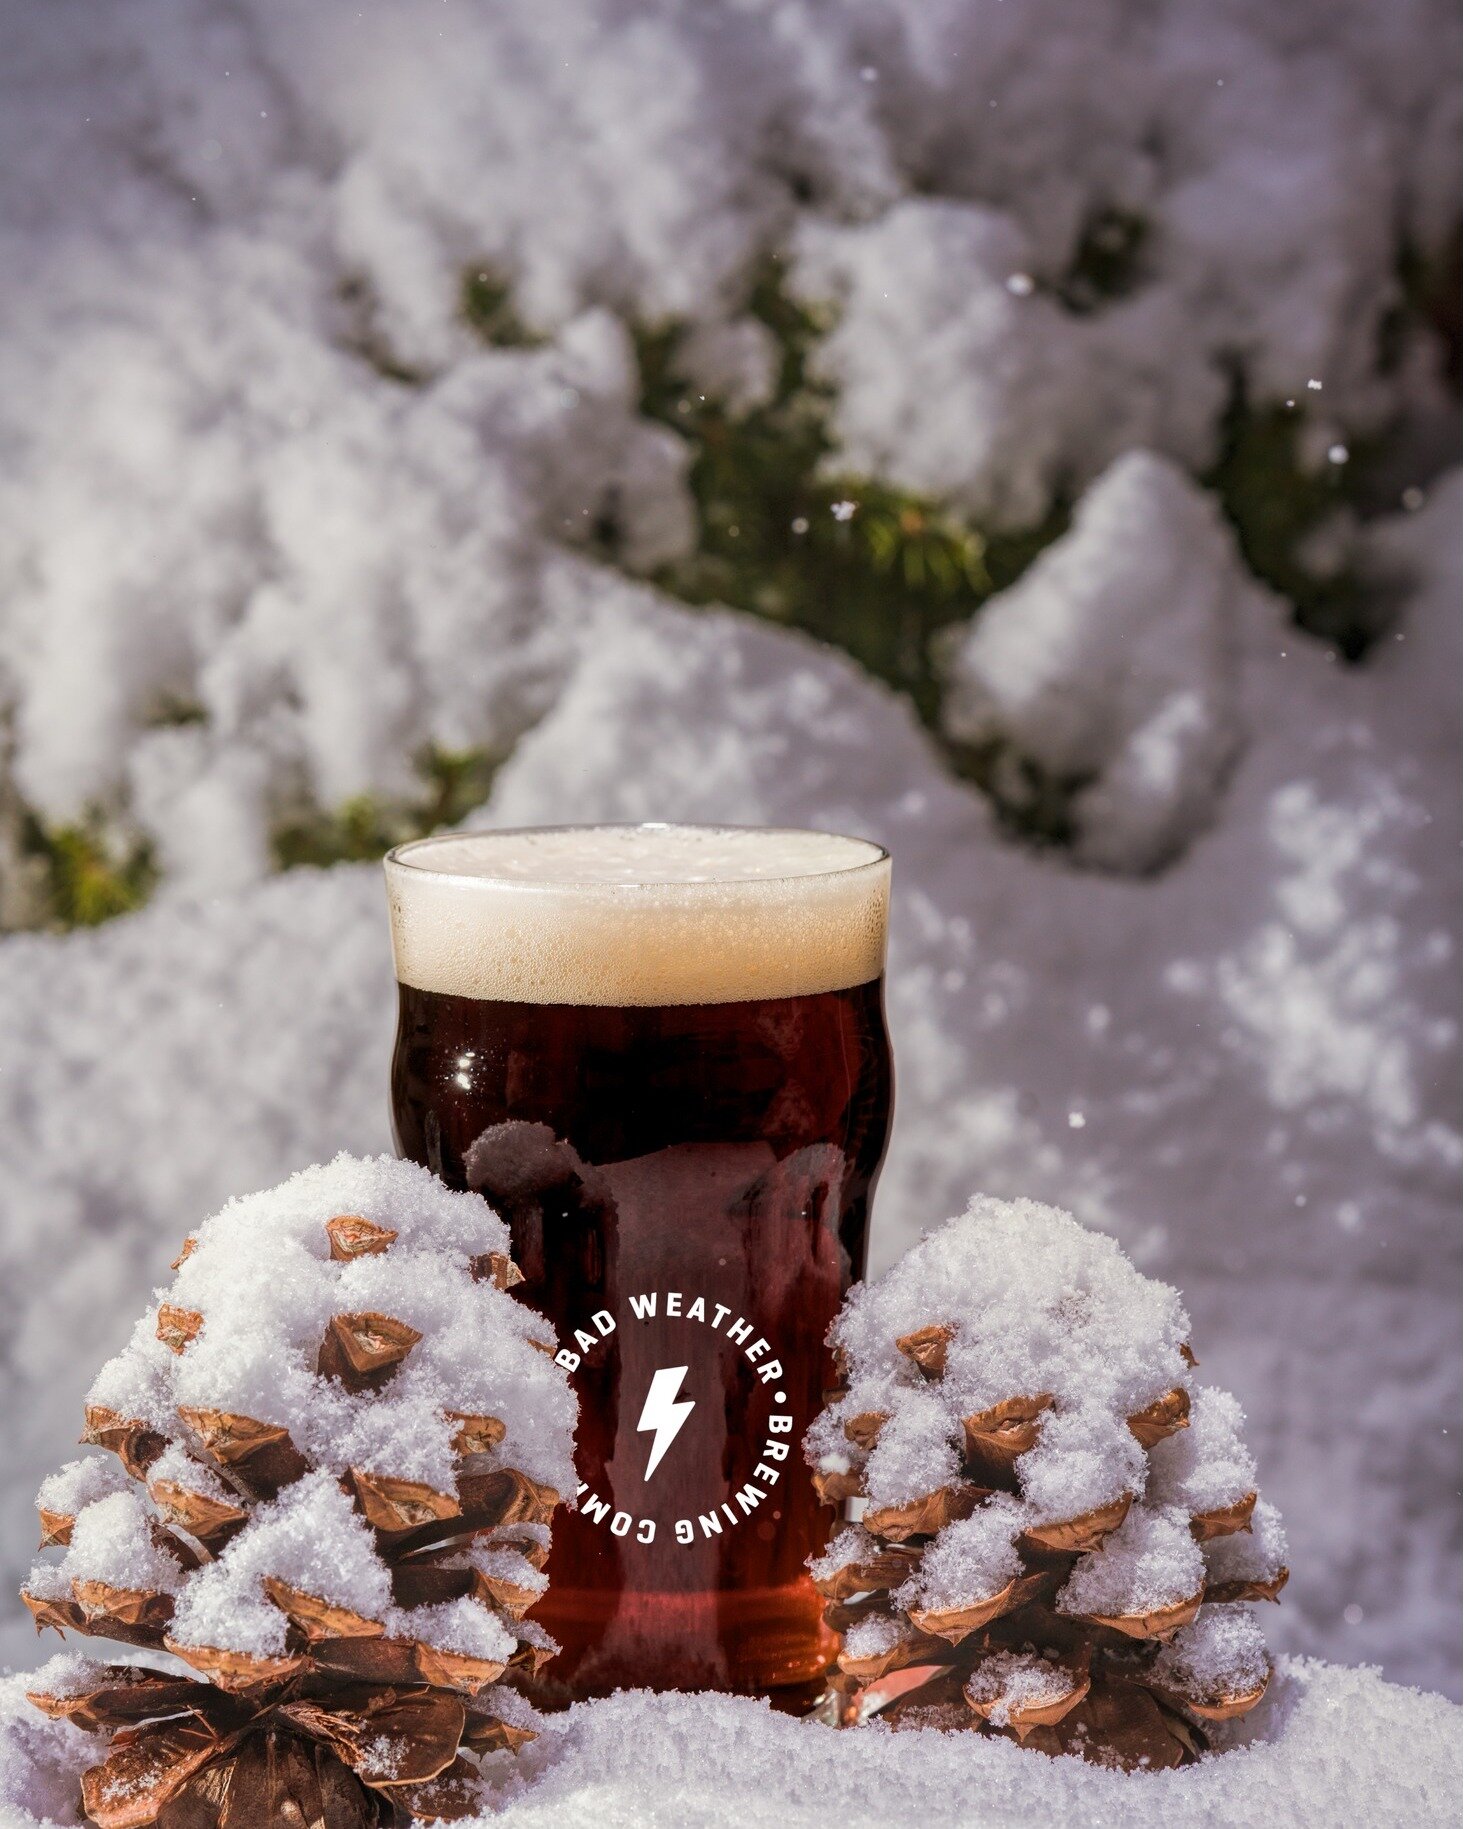 Taproom is going to wrap up around 5pm today. We want to make sure staff can get home before roads get too dicy. 

Go enjoy an Ominous in the snow!